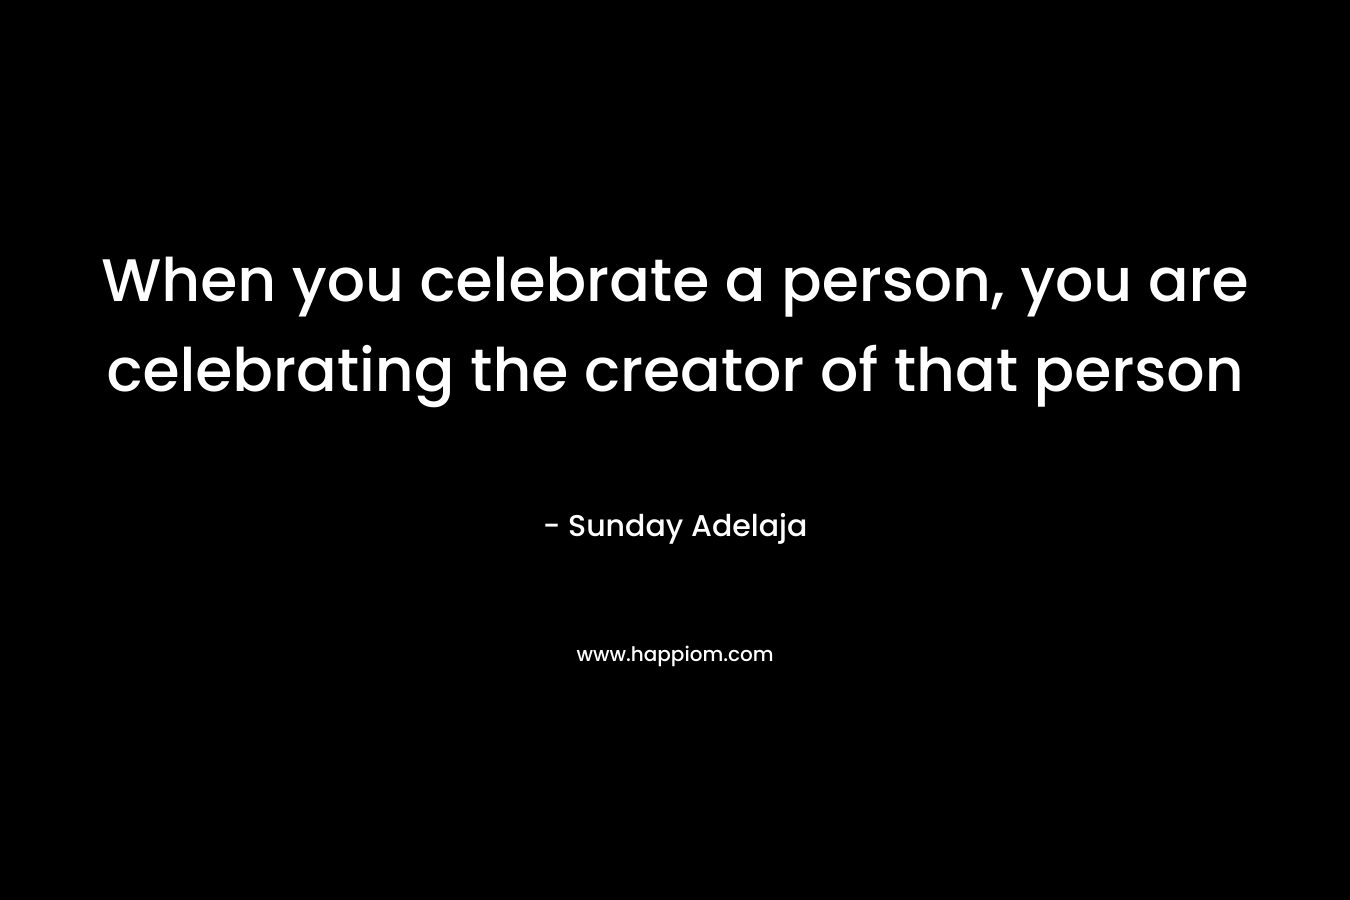 When you celebrate a person, you are celebrating the creator of that person